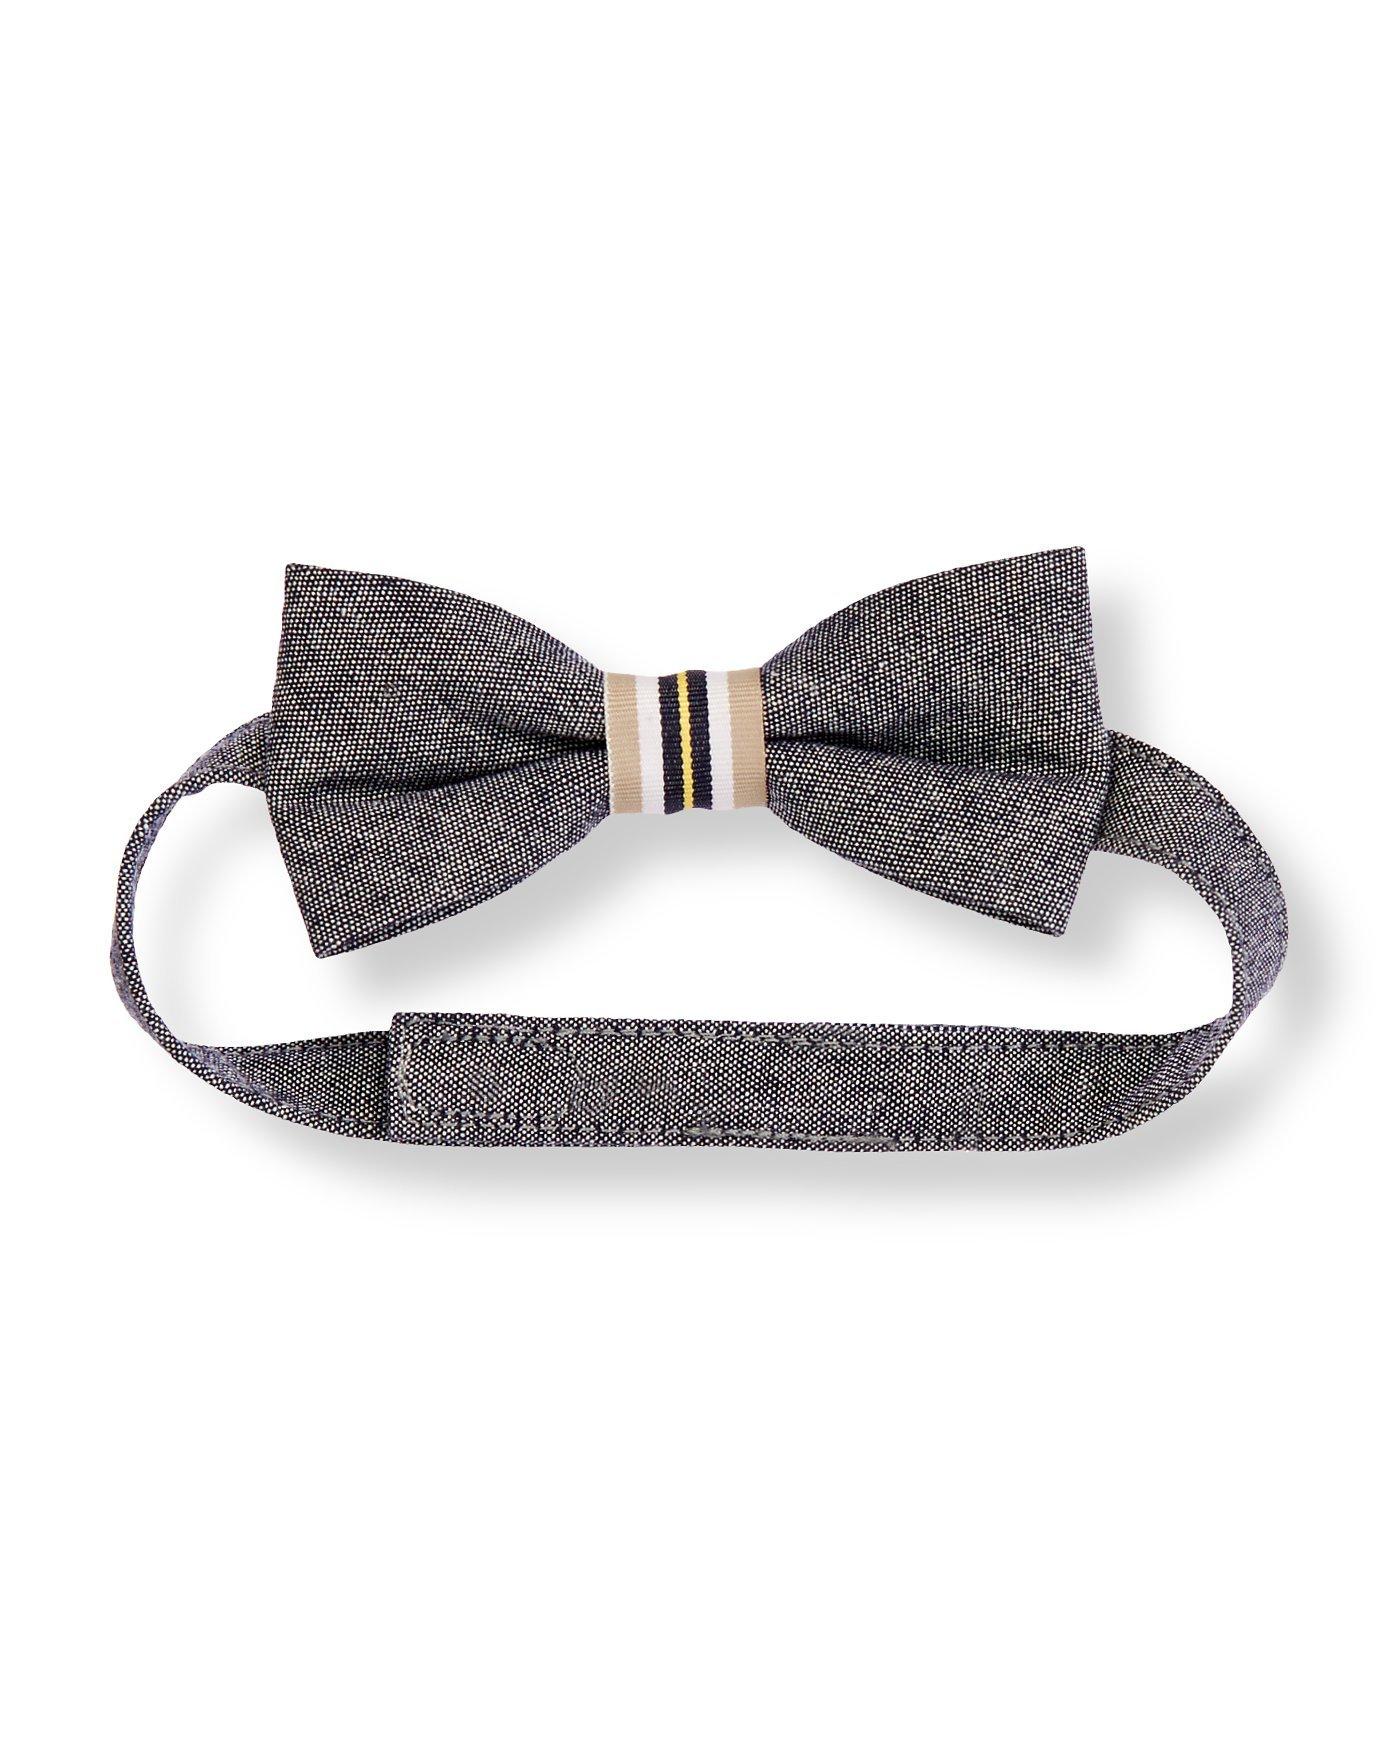 Chambray Bowties image number 0